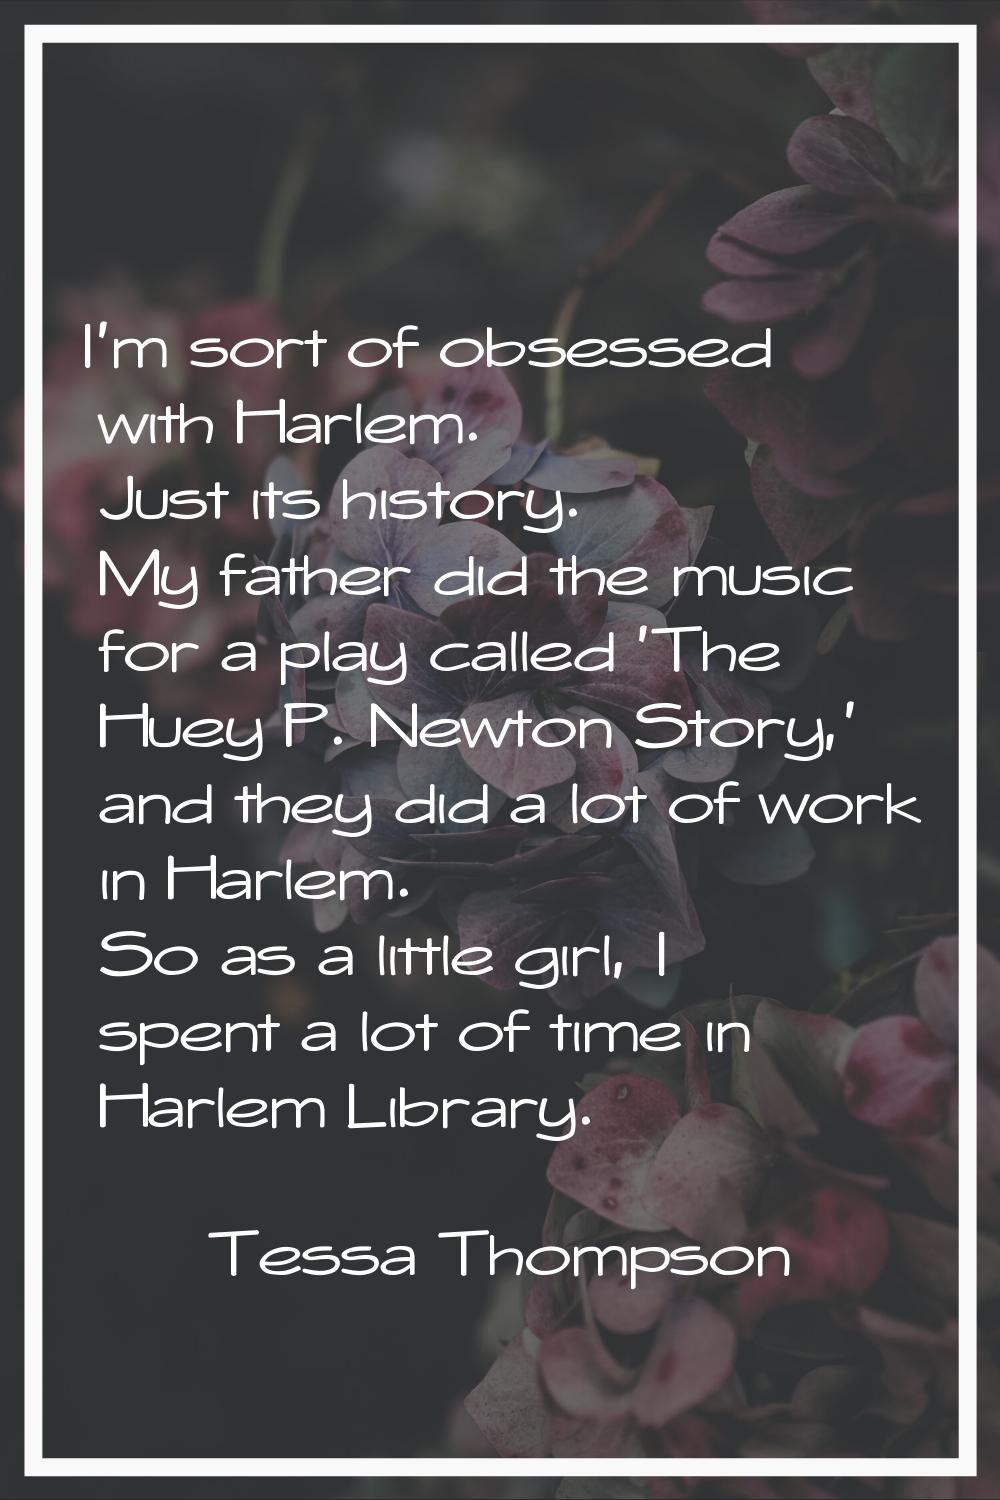 I'm sort of obsessed with Harlem. Just its history. My father did the music for a play called 'The 